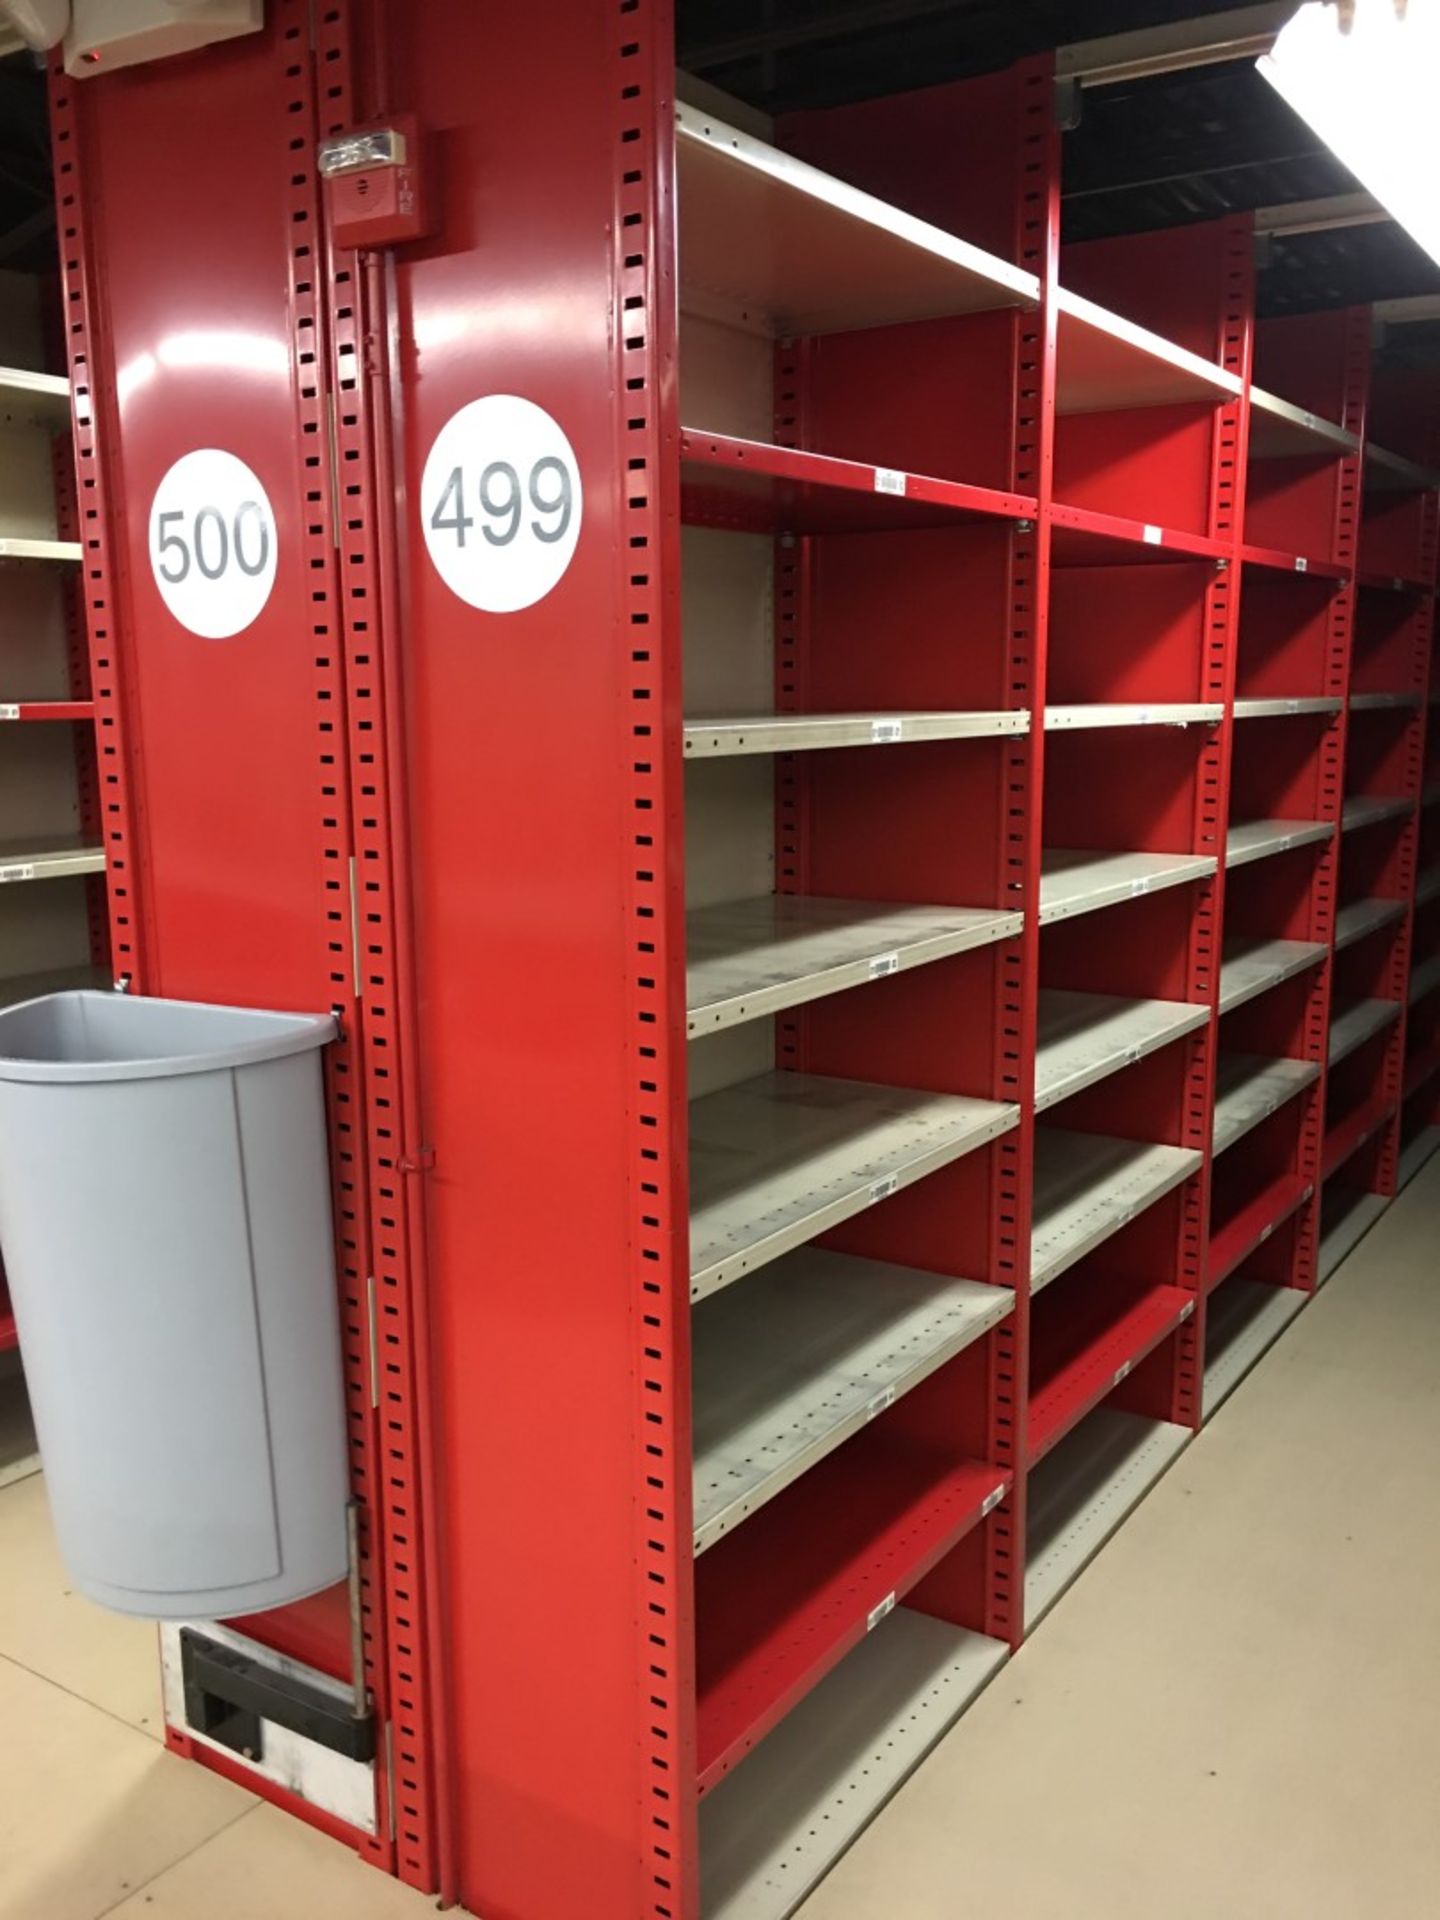 10 SECTIONS OF HALLOWELL H-POST CLOSED BACK SHELVING